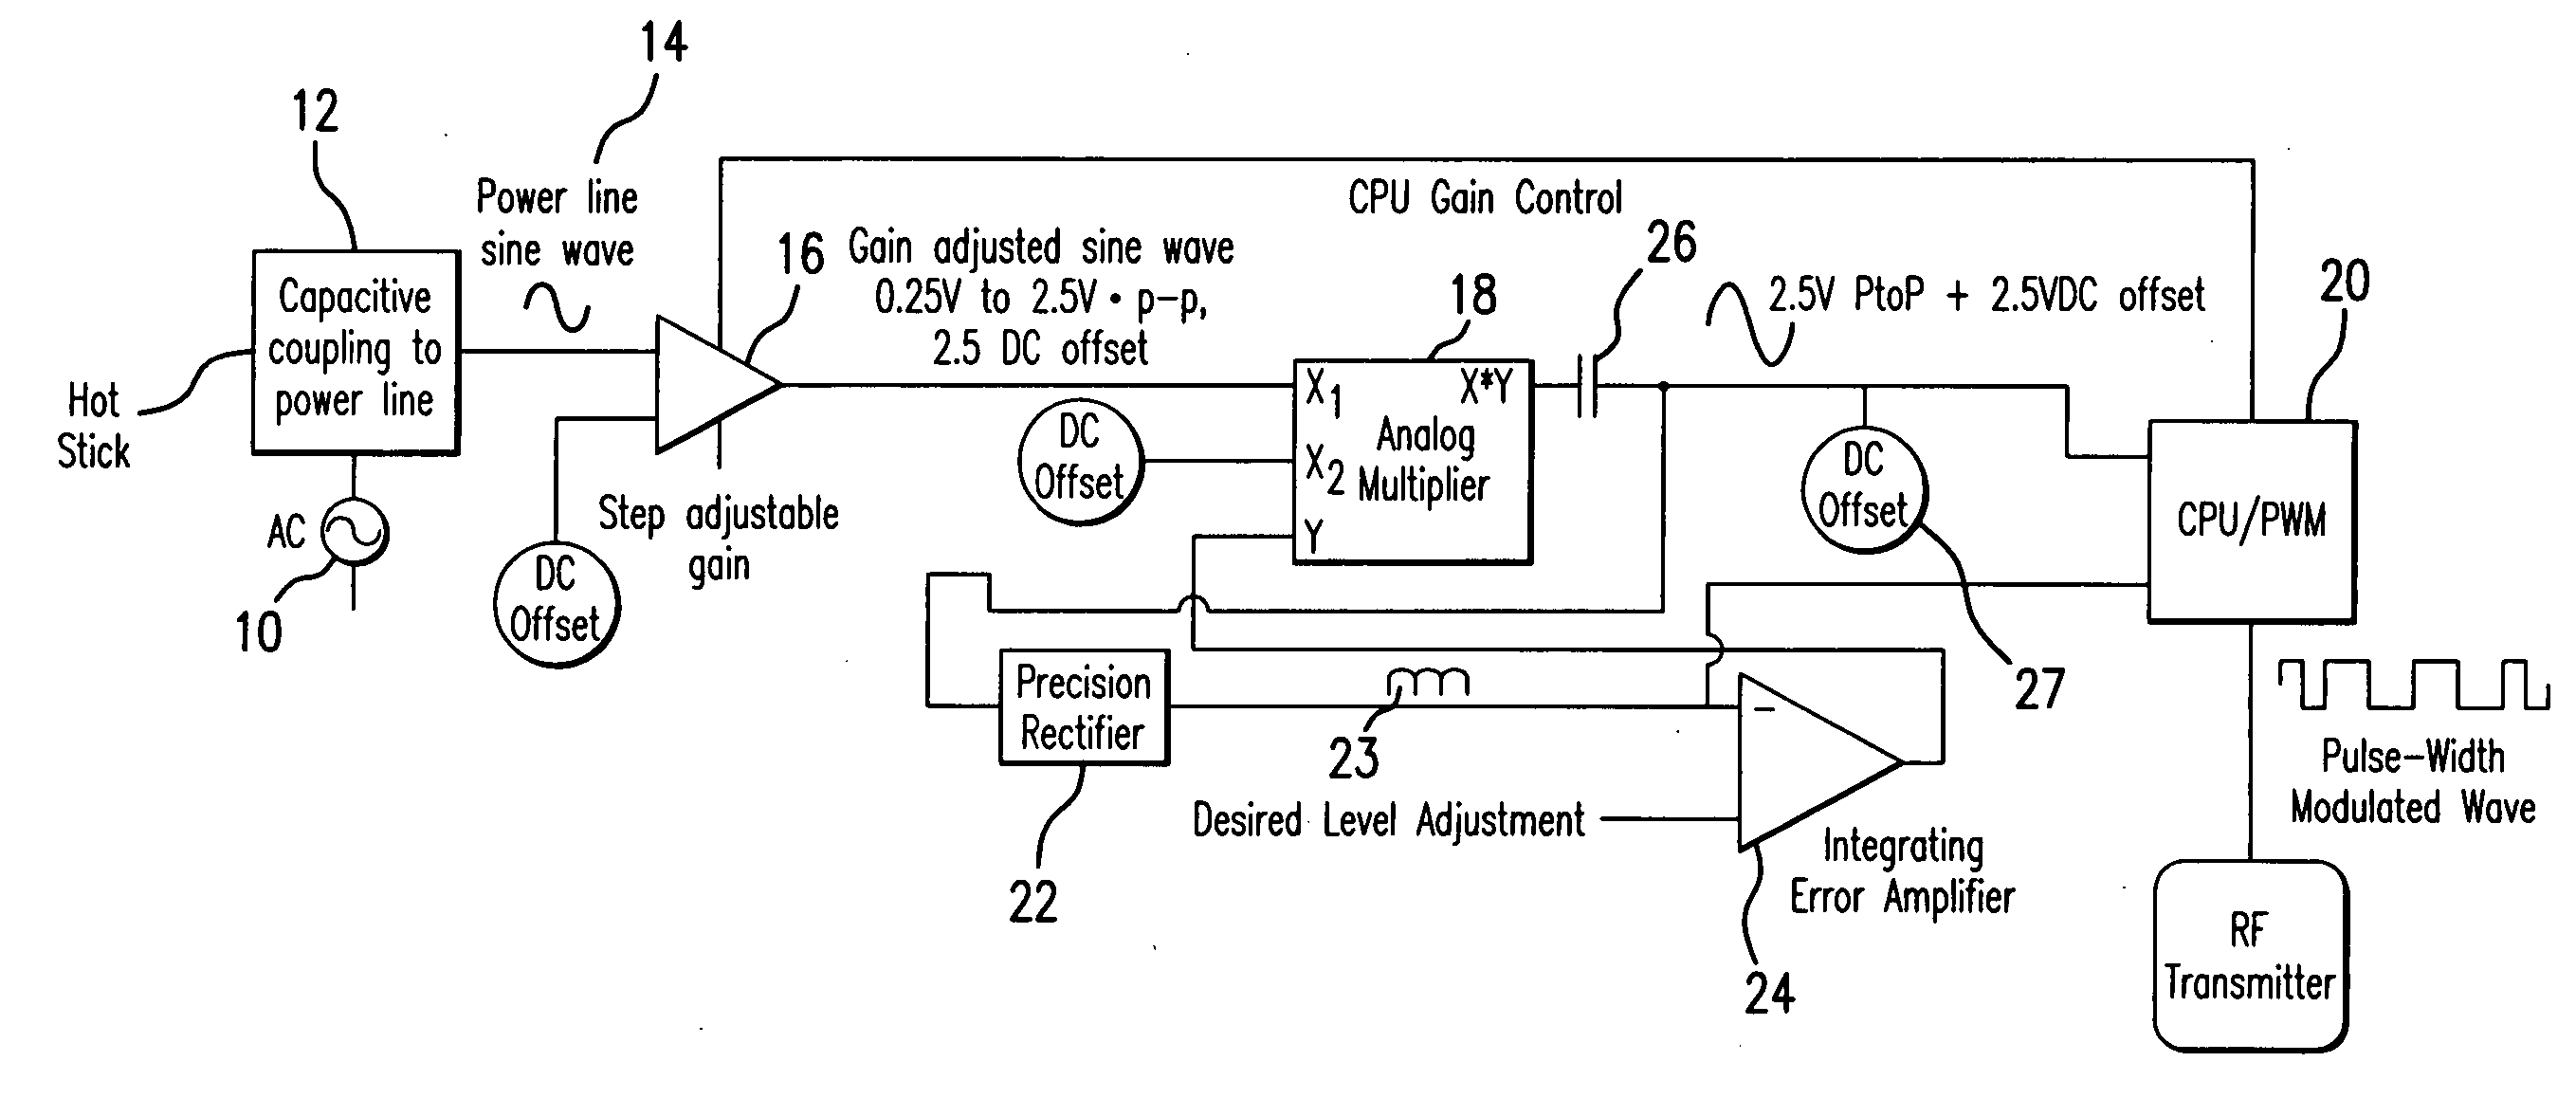 Phase identification apparatus having automatic gain control to prevent detector saturation